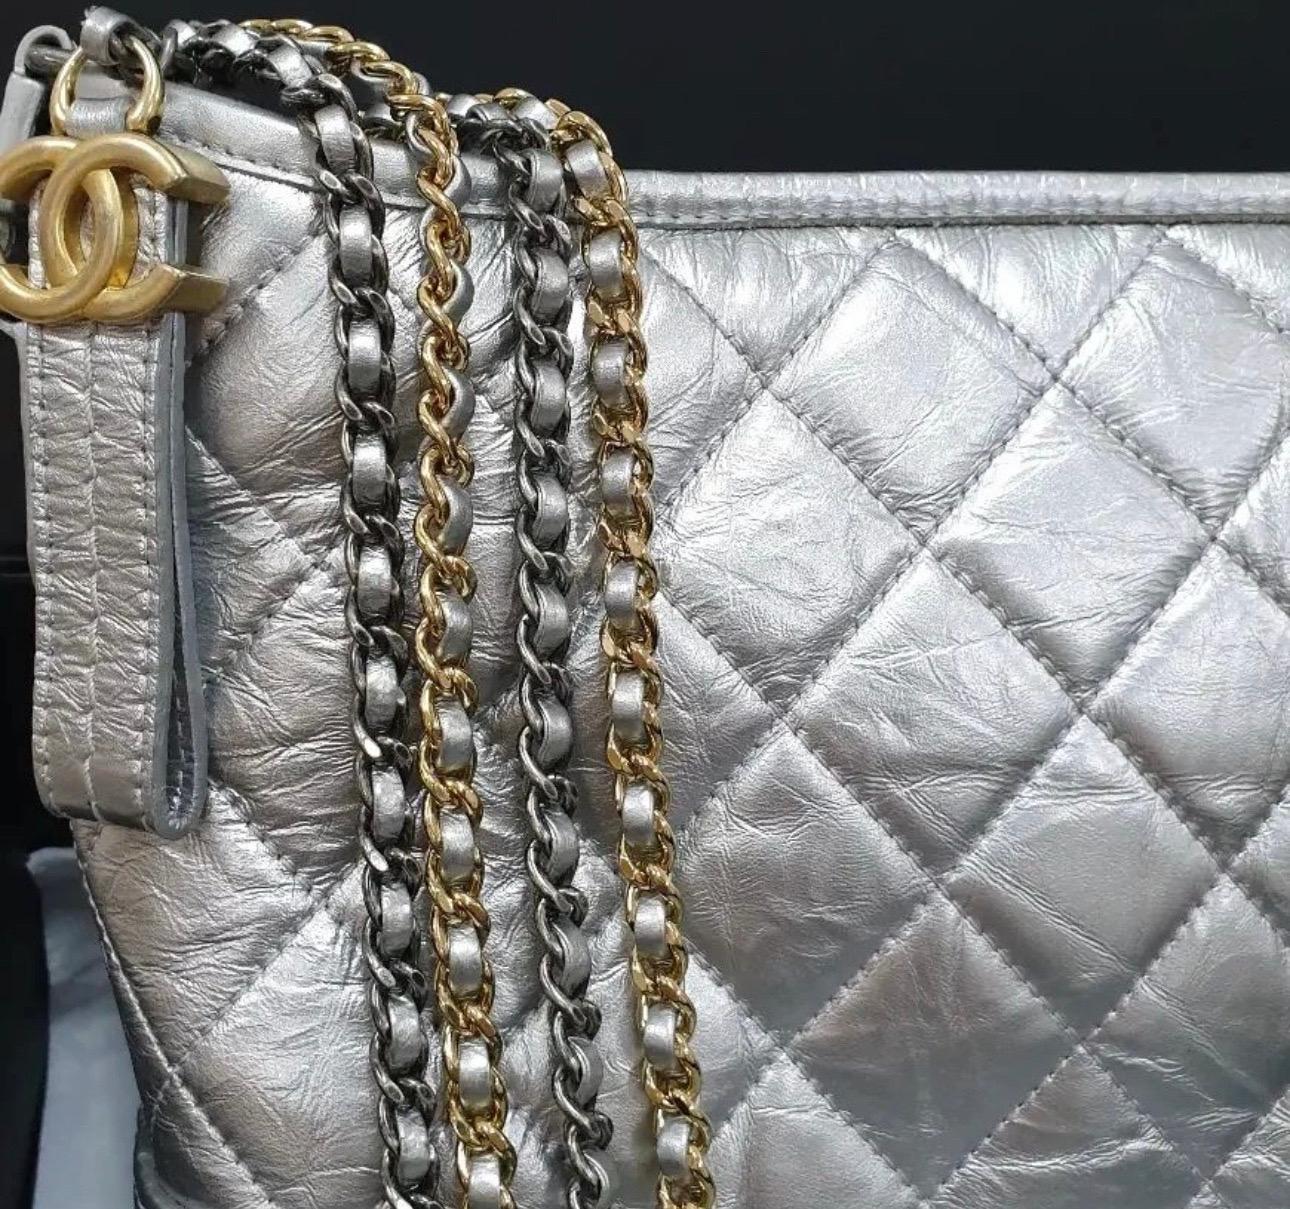 From the Spring 2017 collection, this current Gabrielle Hobo Bag is part of Chanel's new 'Gabrielle' line. 
This particular hobo bag features a sturdy base that provides structure for the quilted leather sides. 
The bag comes with a unique chain